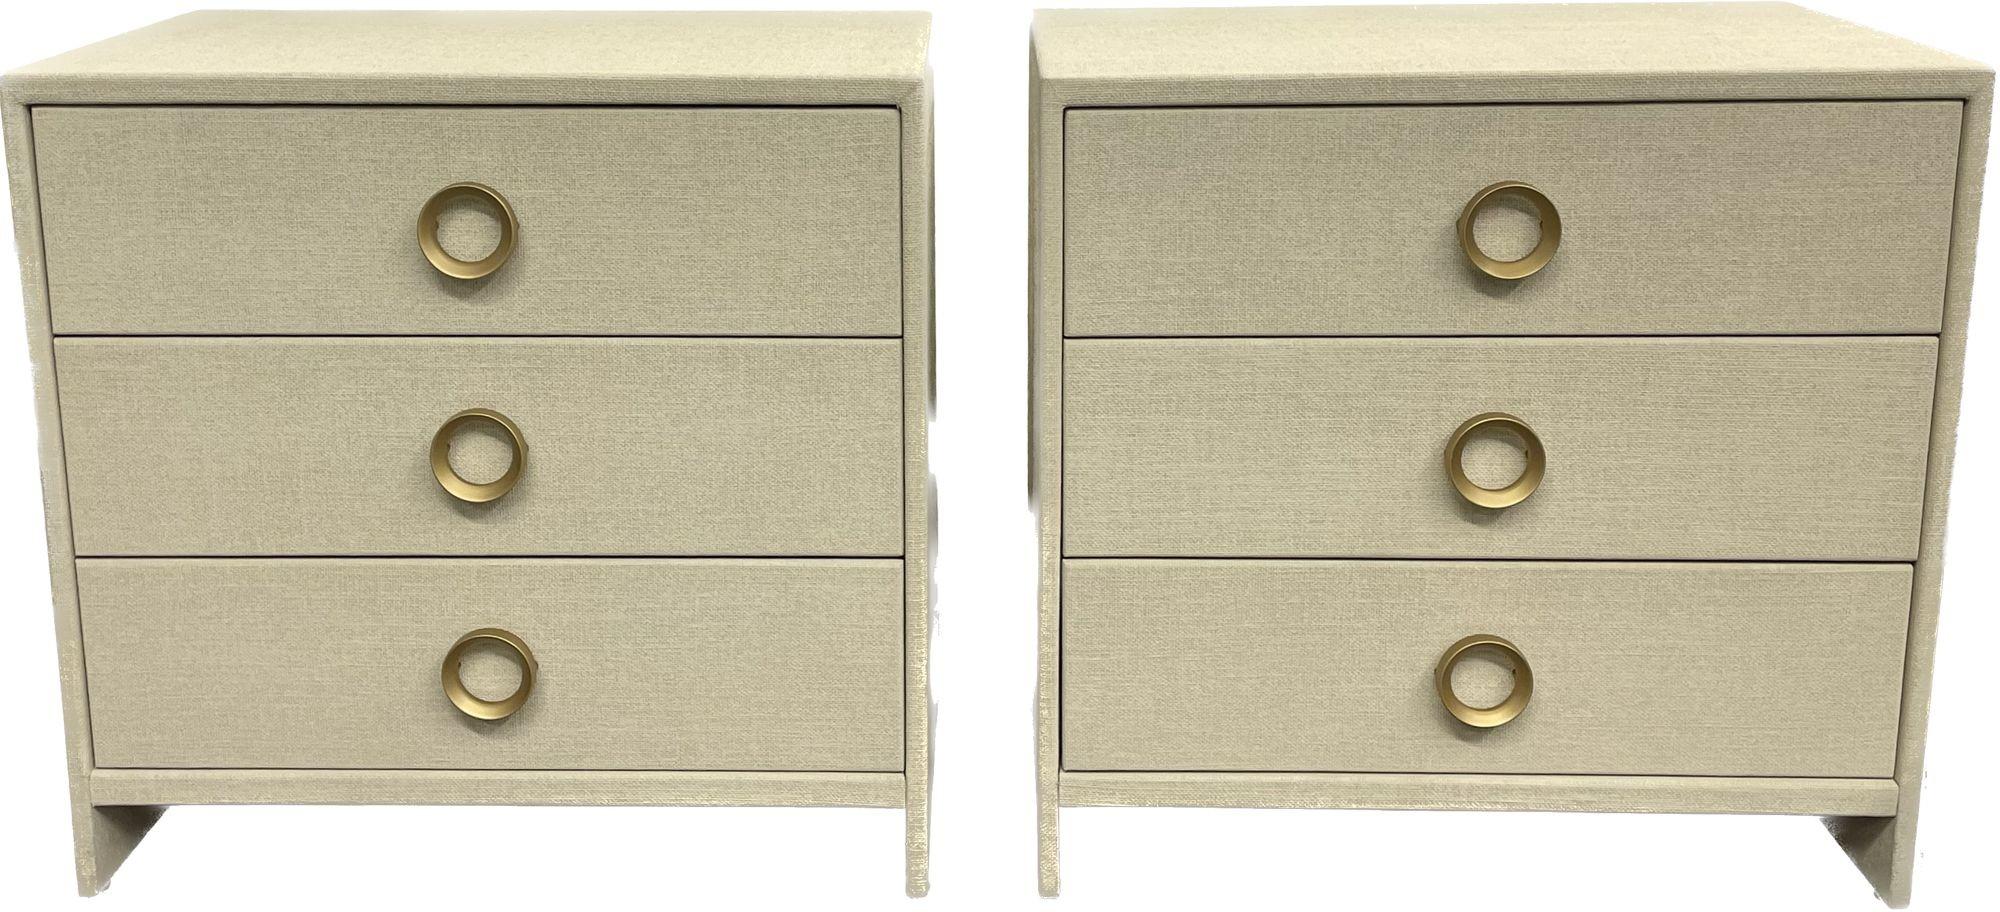 Pair linen wrapped three drawer commodes / chests, nightstands, Modern, American
Custom quality pair of three drawer modern decorative cabinets. Each on floating sides, hand wrapped in linen and given a multi-layered paint glaze in a neutral oyster